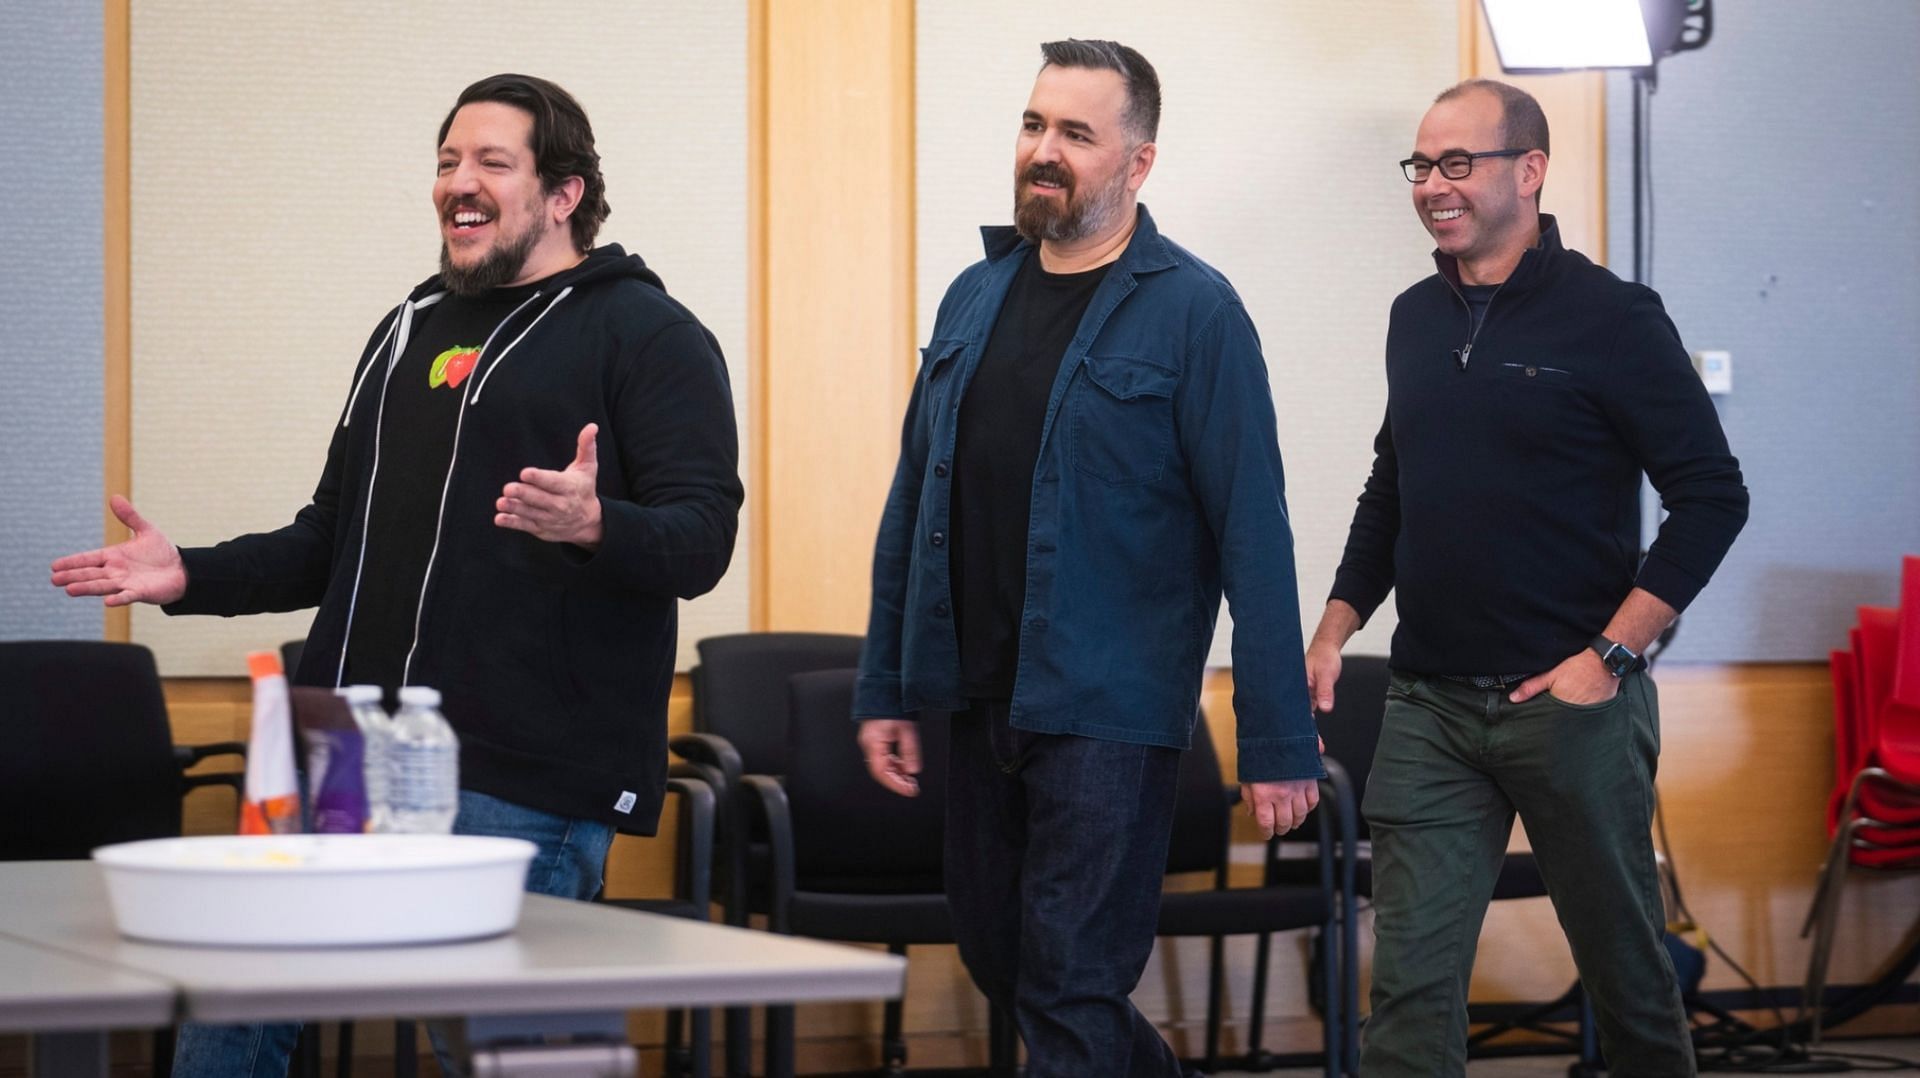 Impractical Jokers tour 2023 Tickets, presale, where to buy, dates